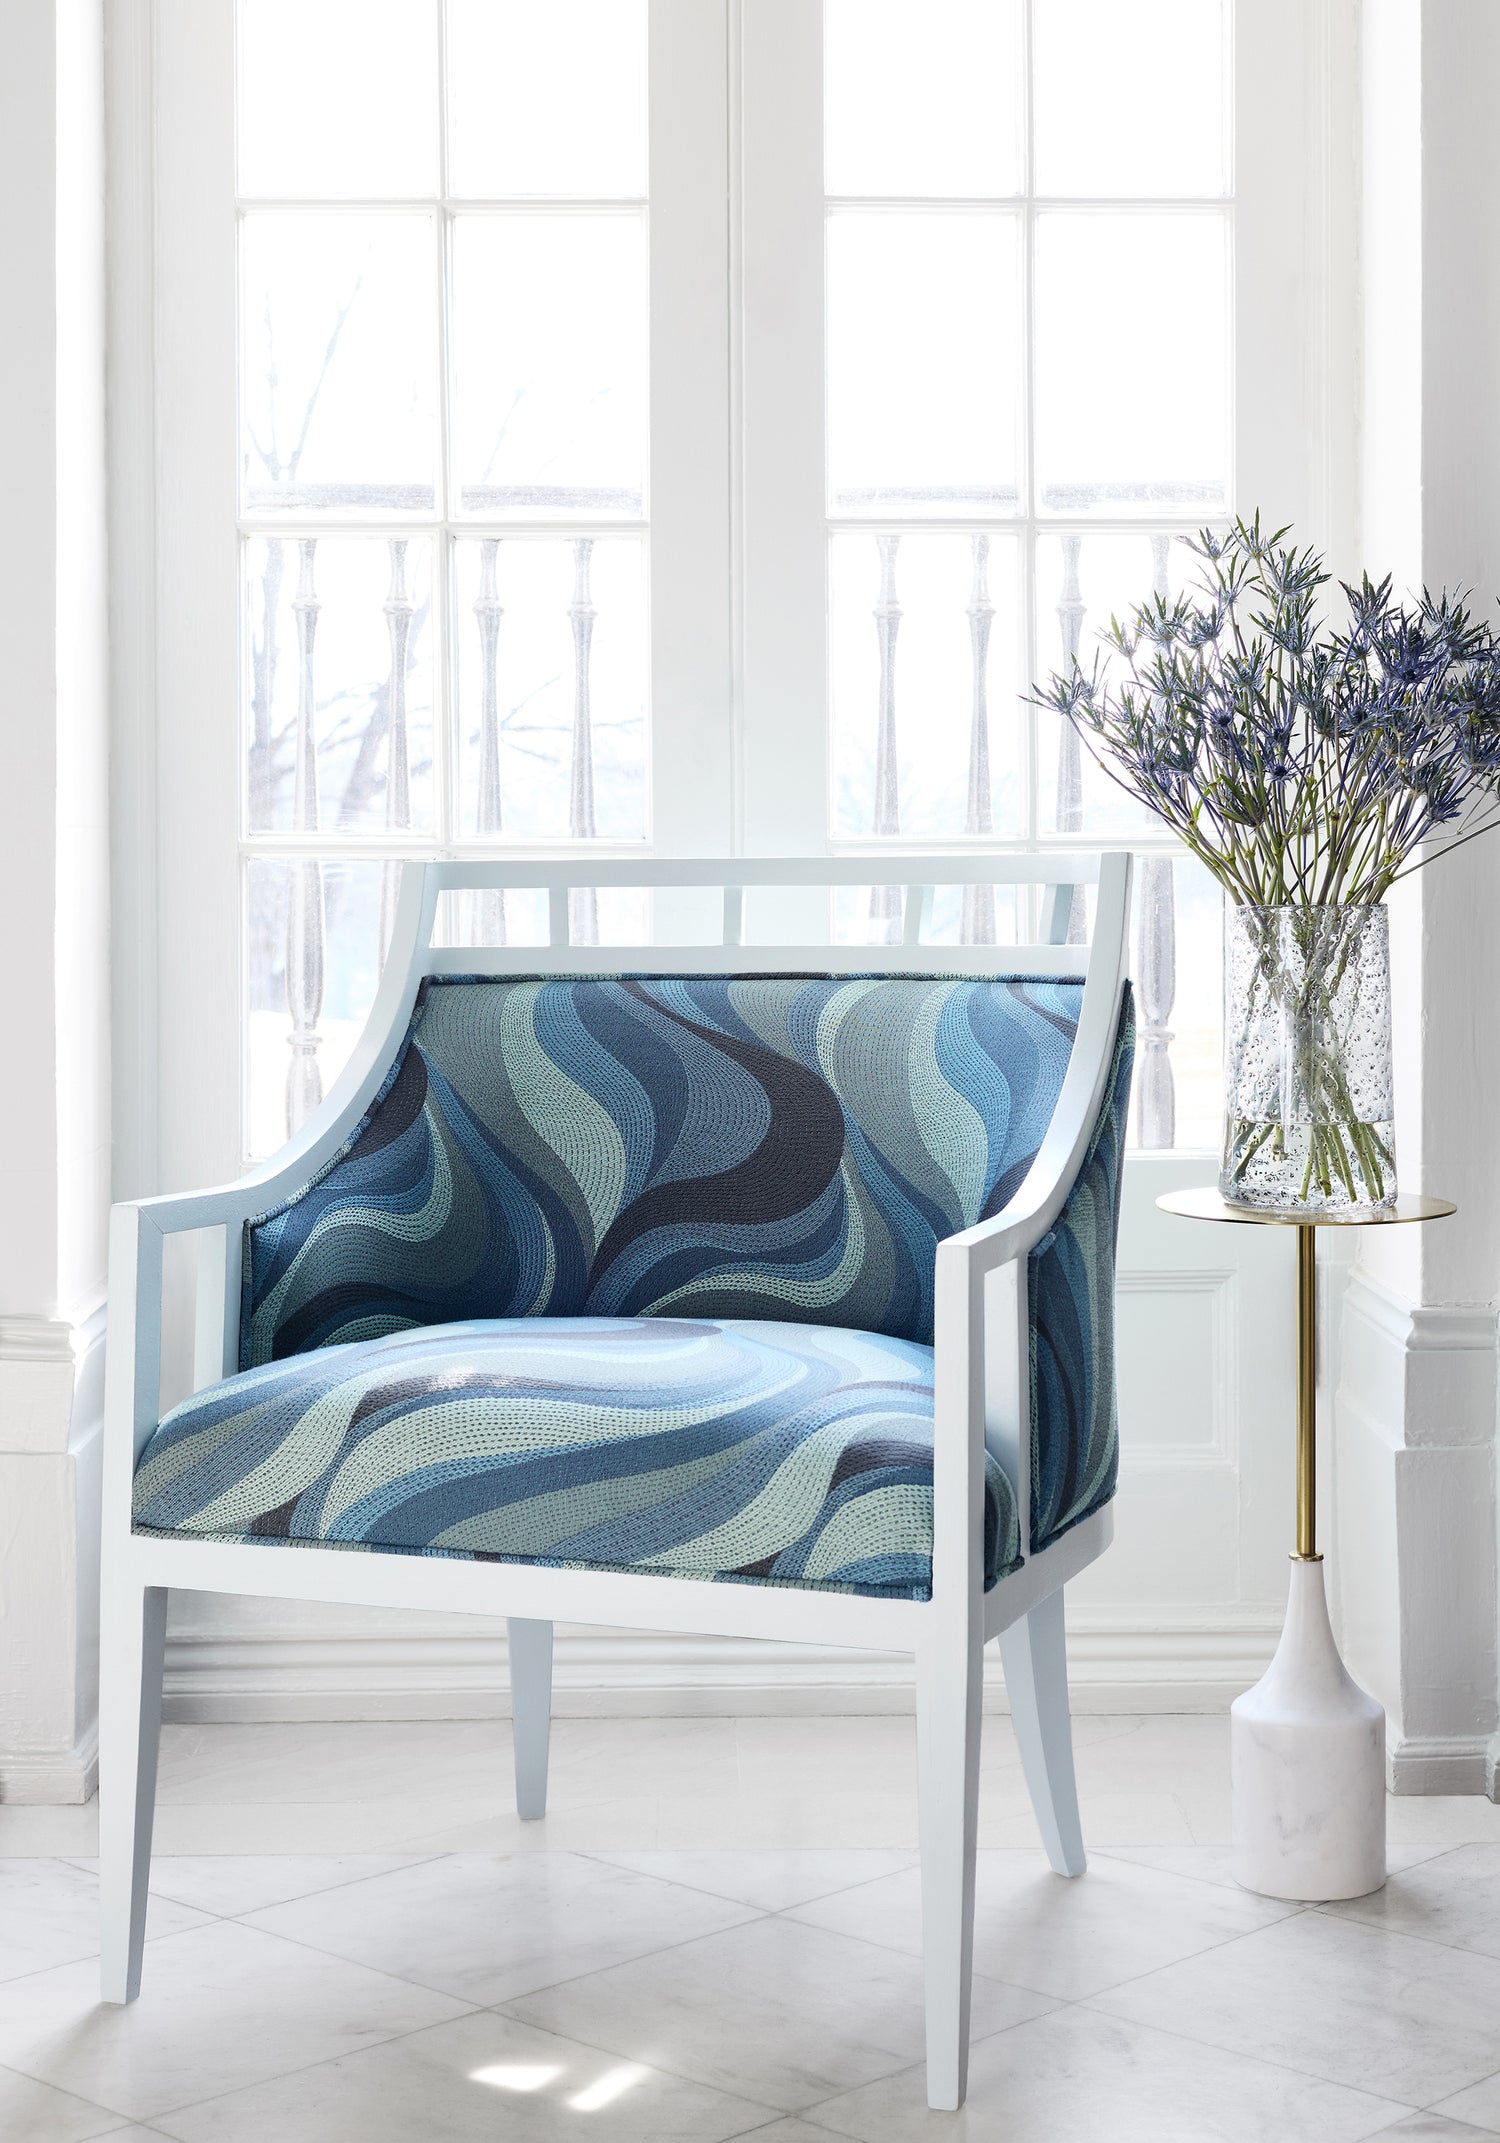 Malibu Chair in Passage woven fabric in Lake color - pattern number W74201 - by Thibaut in the Passage collection